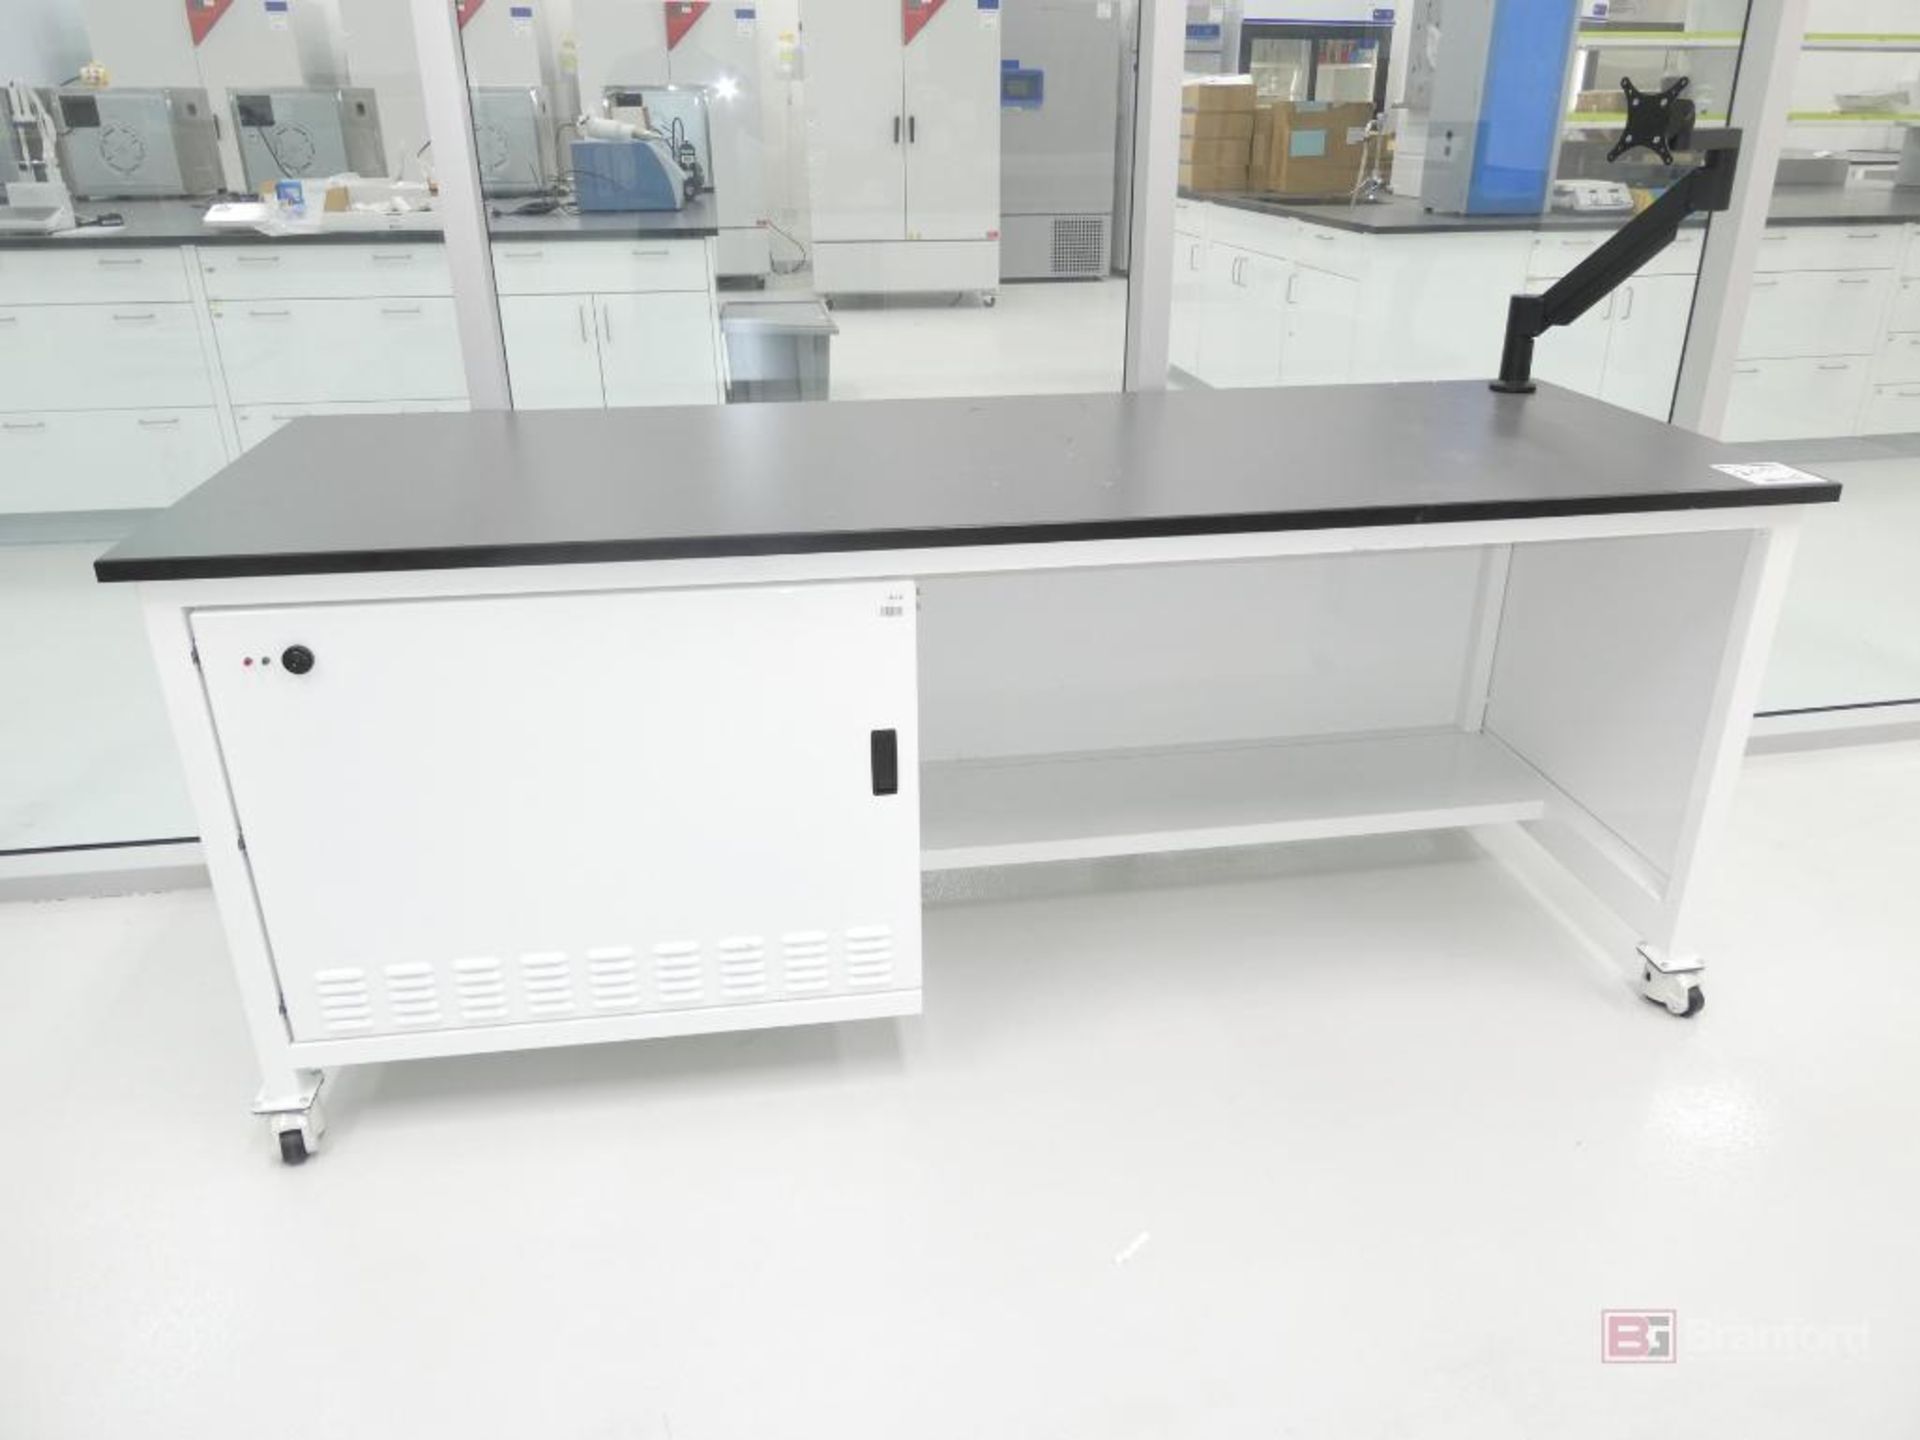 (2) Food Prep Table/Monitor Mounting Arm/Lower Equipment Cabinet